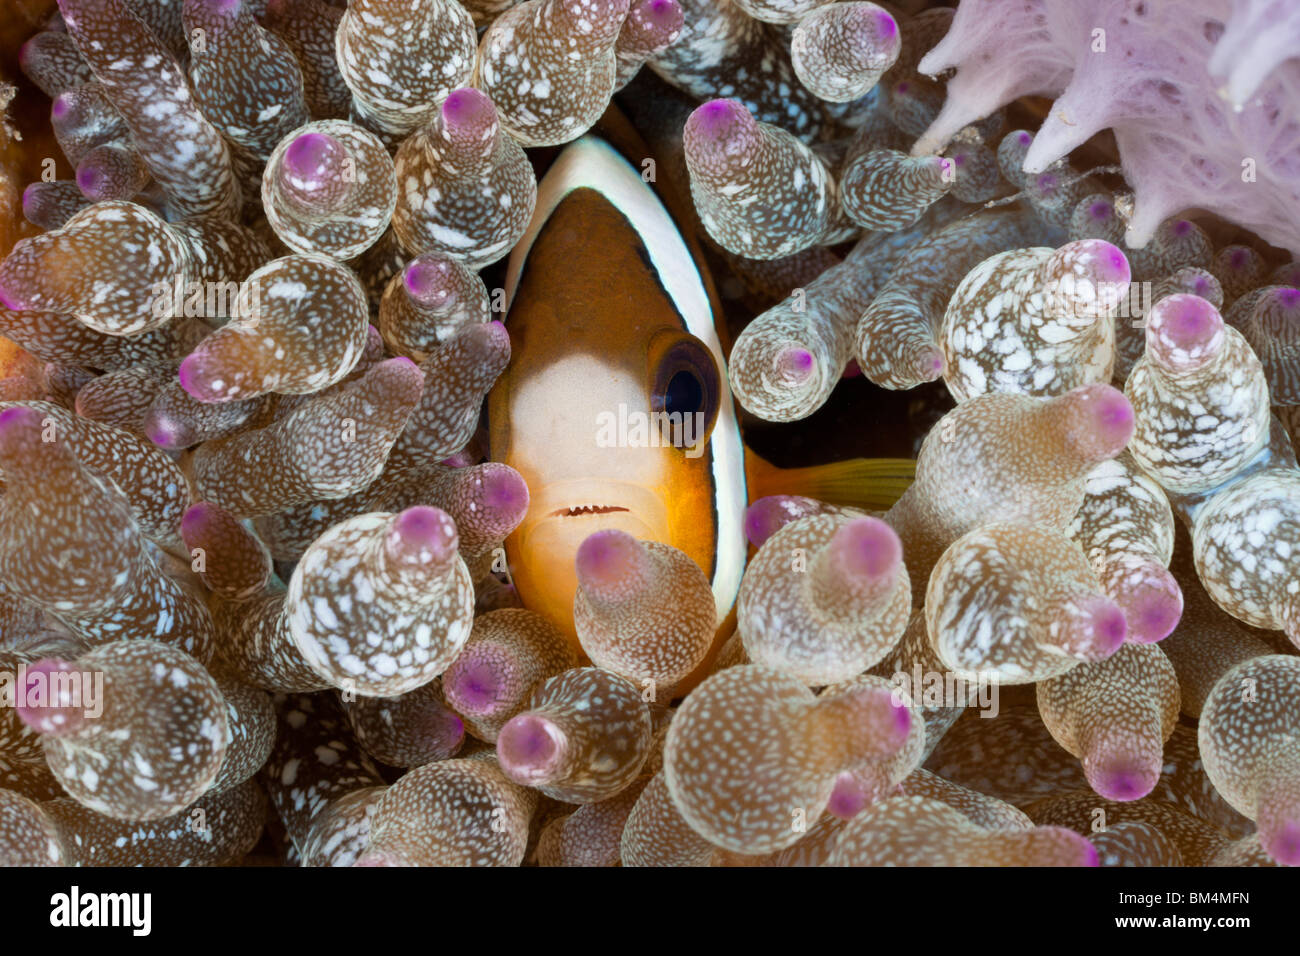 Clarks Anemonefish in bolla Anemone, Amphiprion clarkii, Entacmaea quadricolor, Lembeh strait, Nord Sulawesi, Indonesia Foto Stock